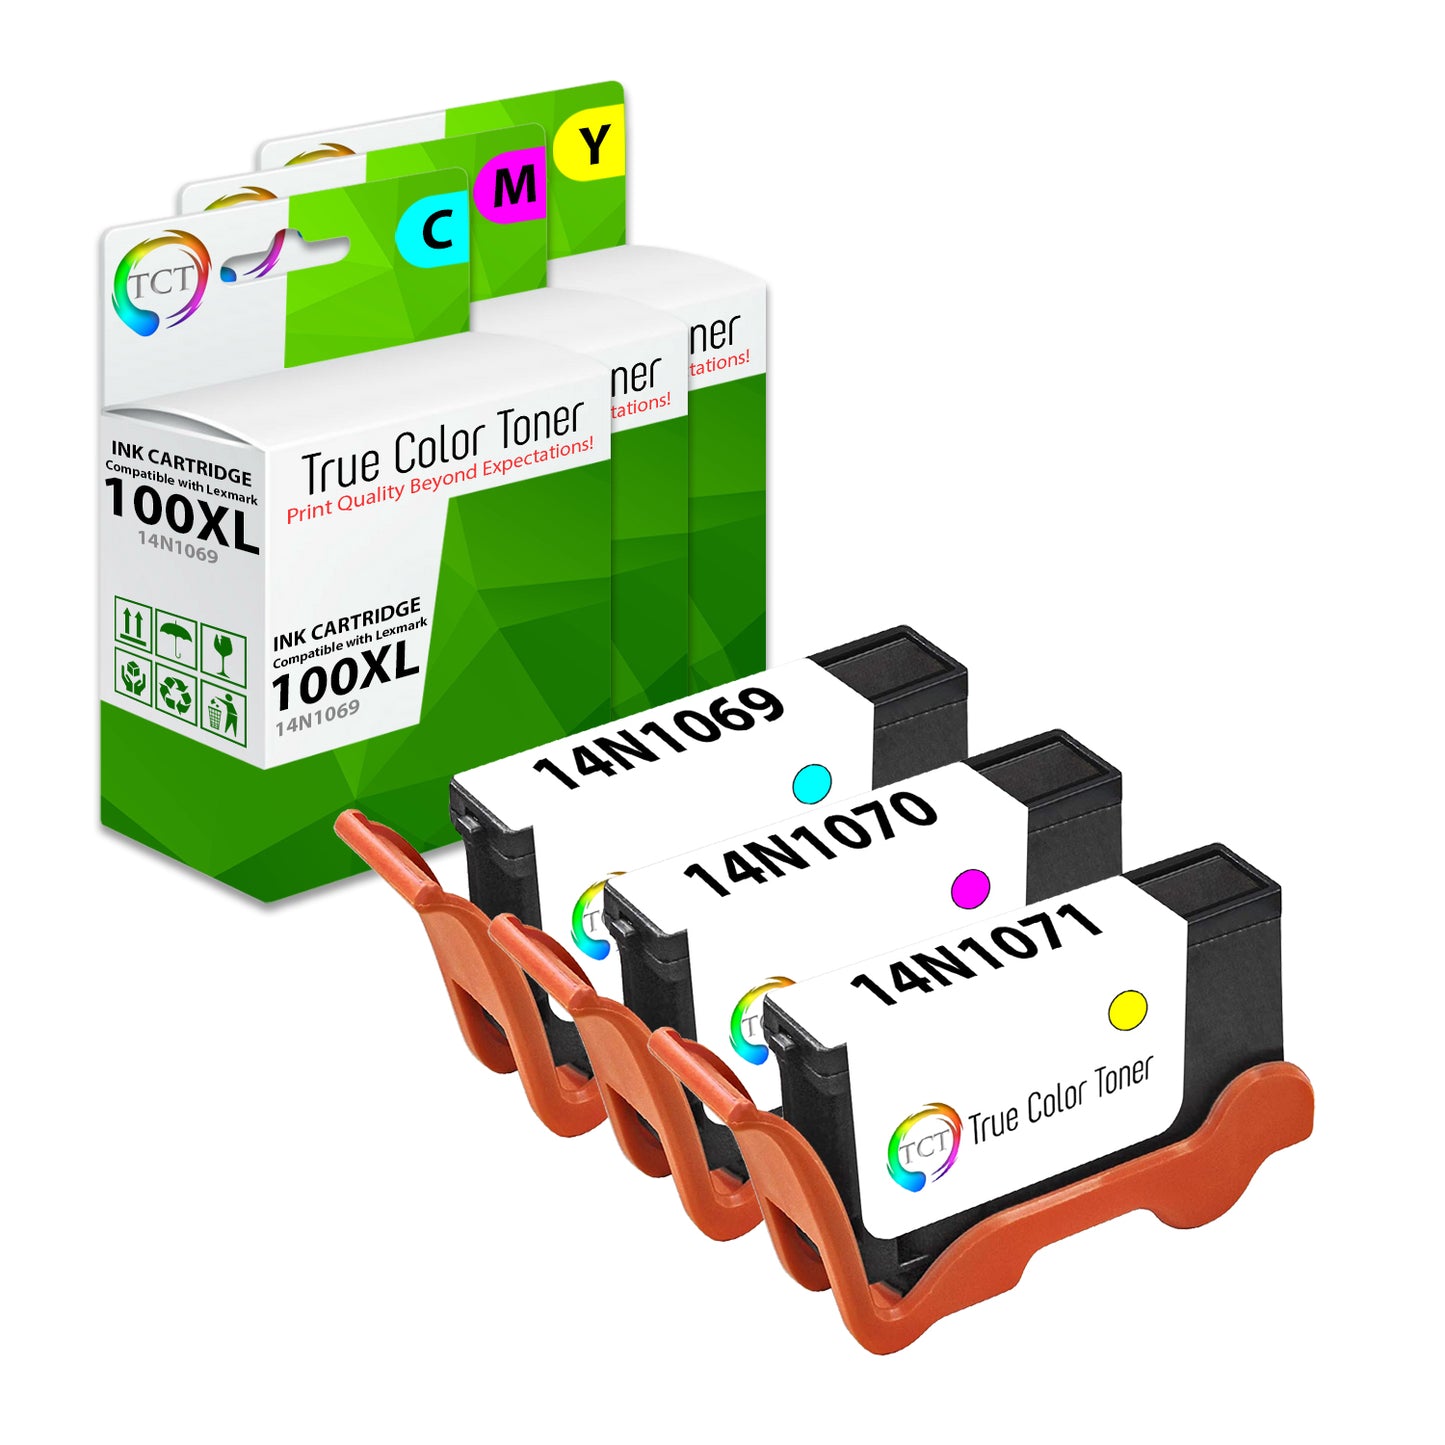 TCT Remanufactured High Yield Ink Cartridge Replacement for the Lexmark 100XL Series - 3 Pack (C, M, Y)